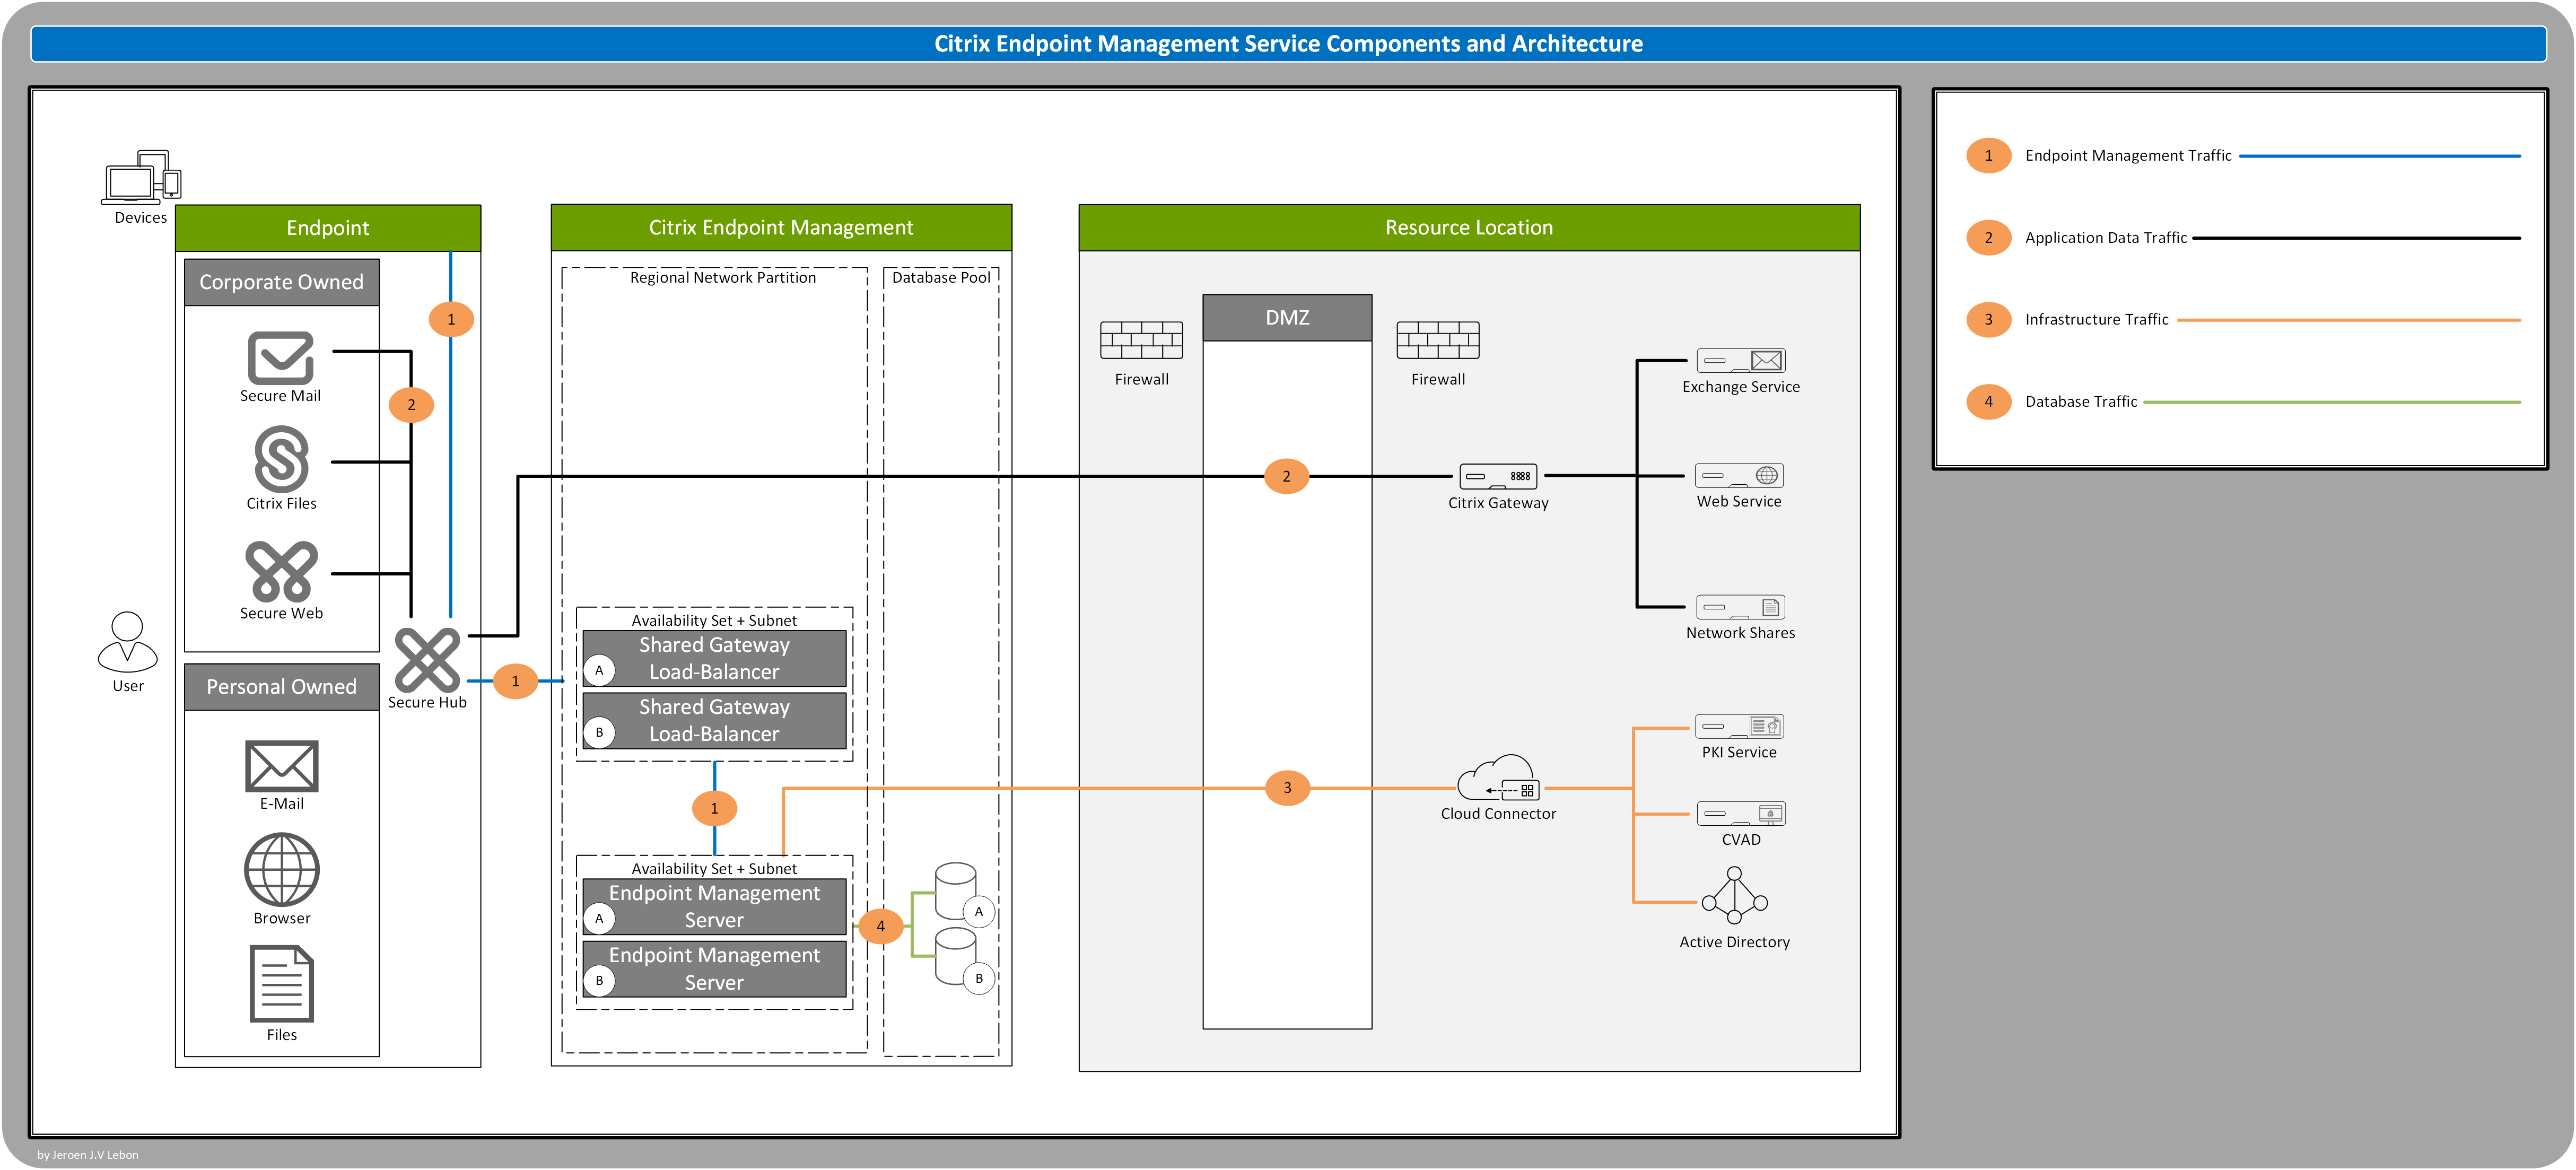 Service Architecture of Unified Endpoint Management